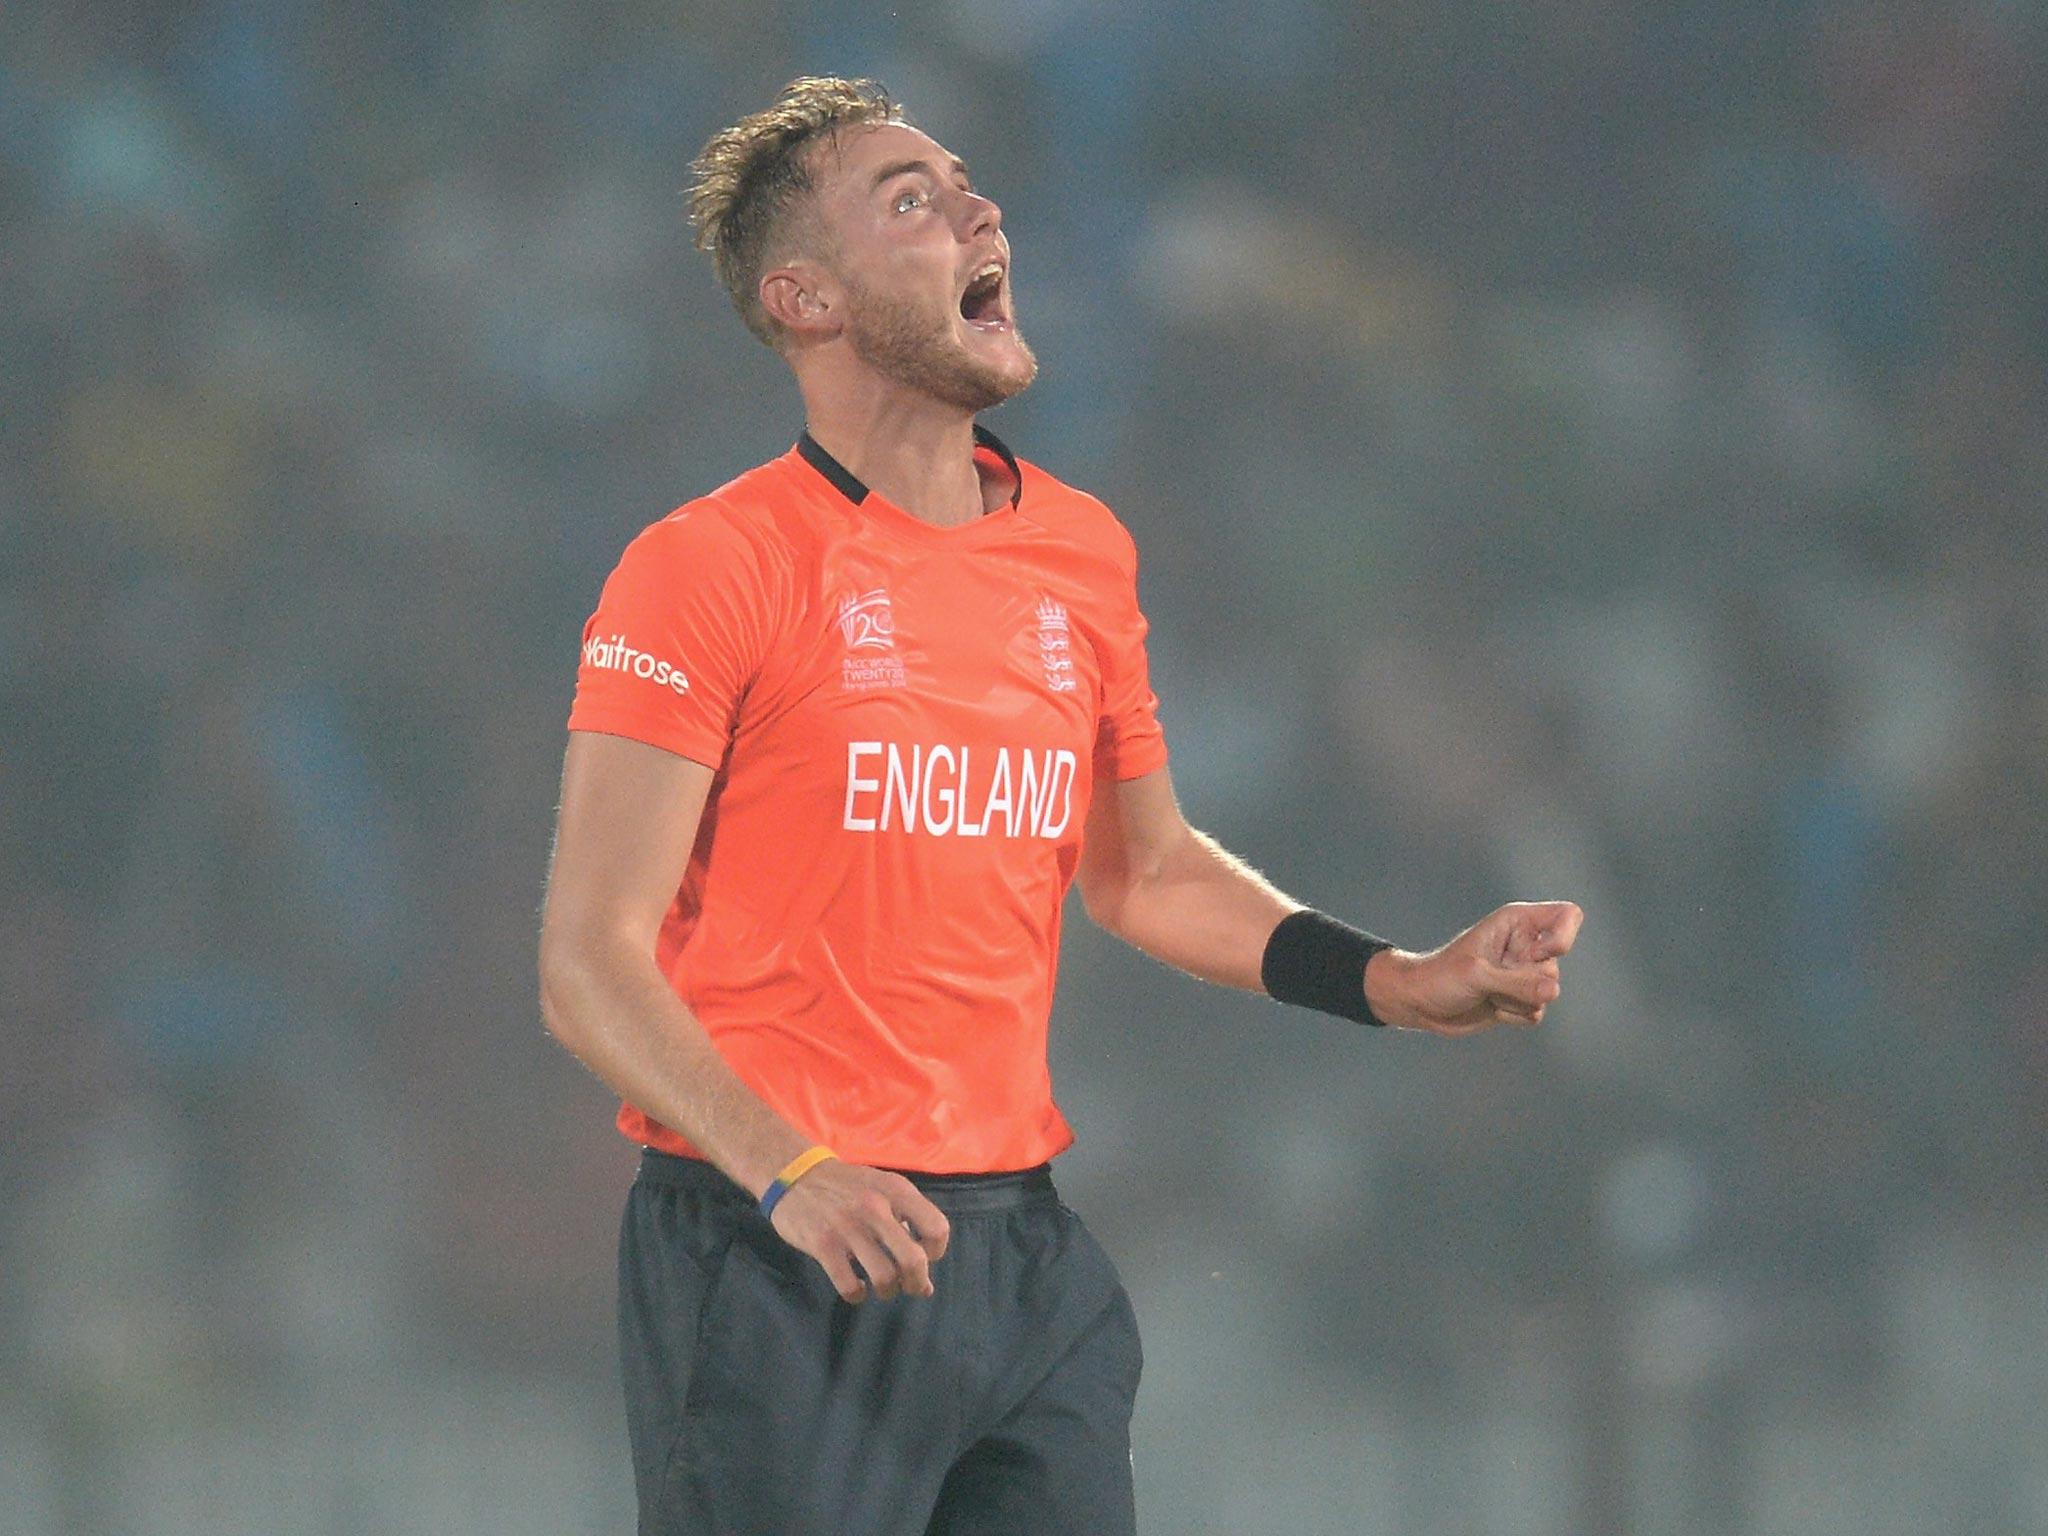 Stuart Broad claims that England will improve this summer